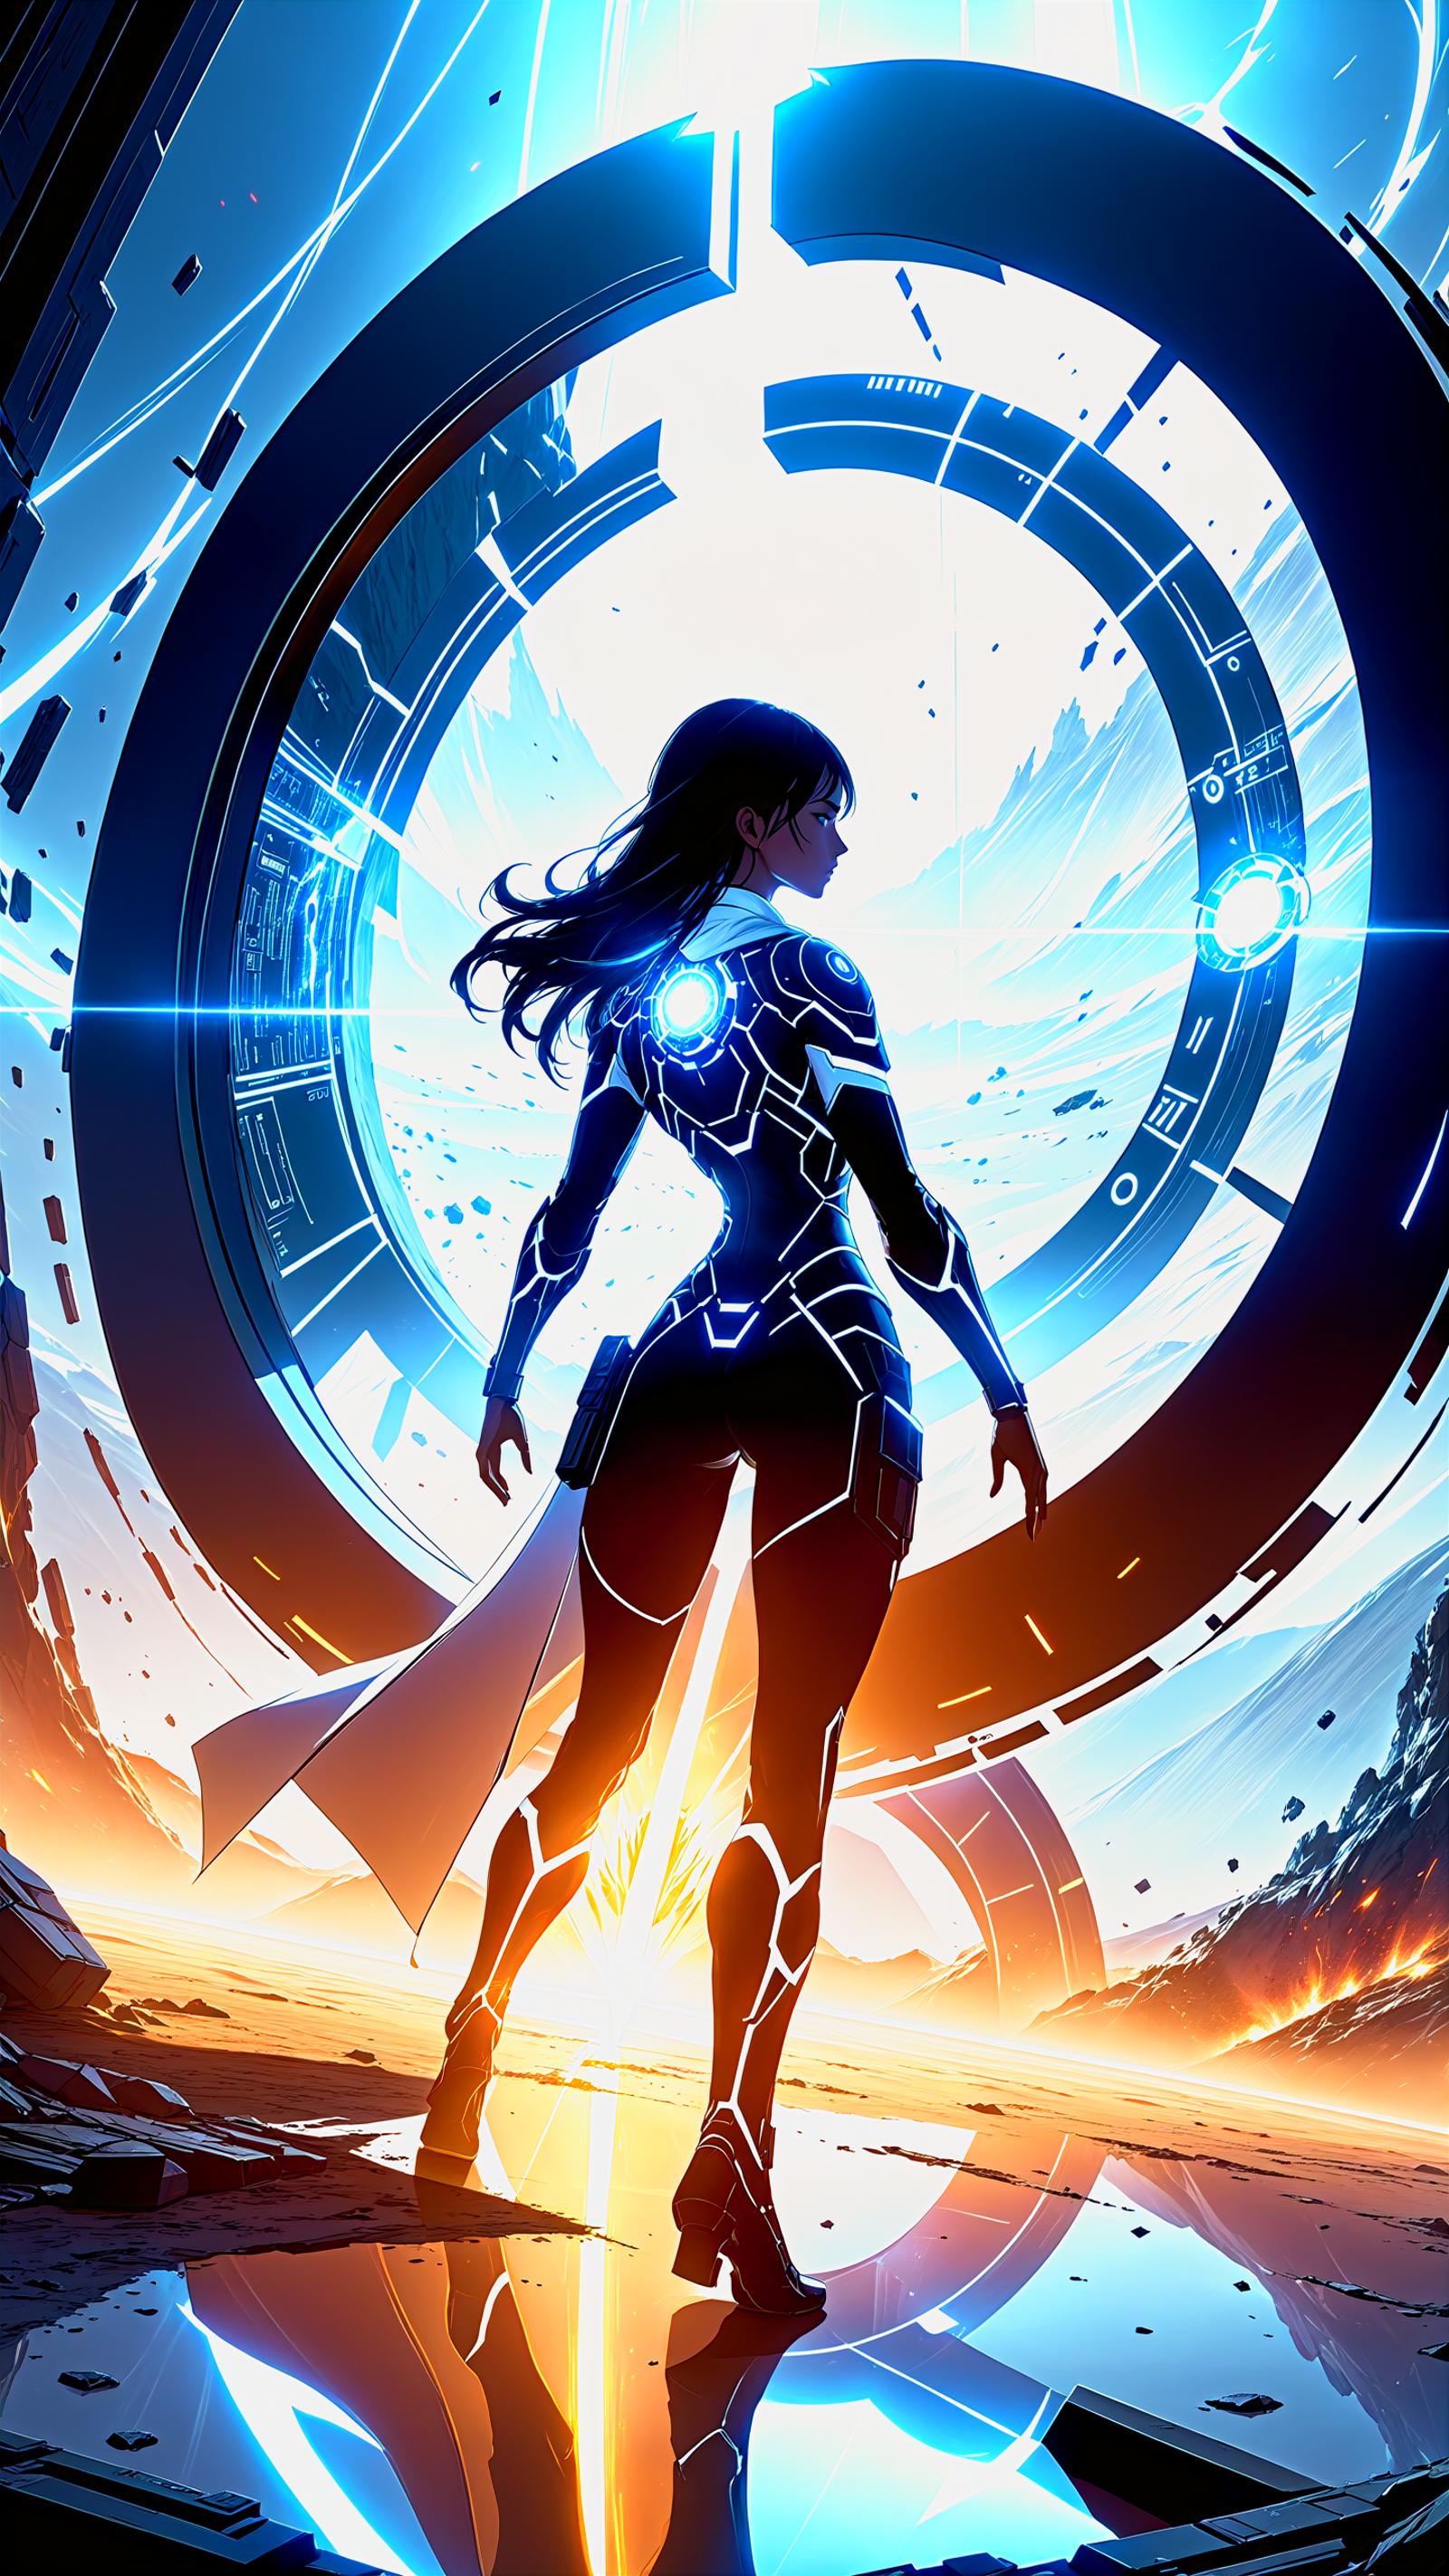 A woman in a blue and black outfit is standing in front of a blue circle, which appears to be a wormhole. She is wearing a white cape and is holding a gun in her hand. The image is set against a backdrop of a blue sky.